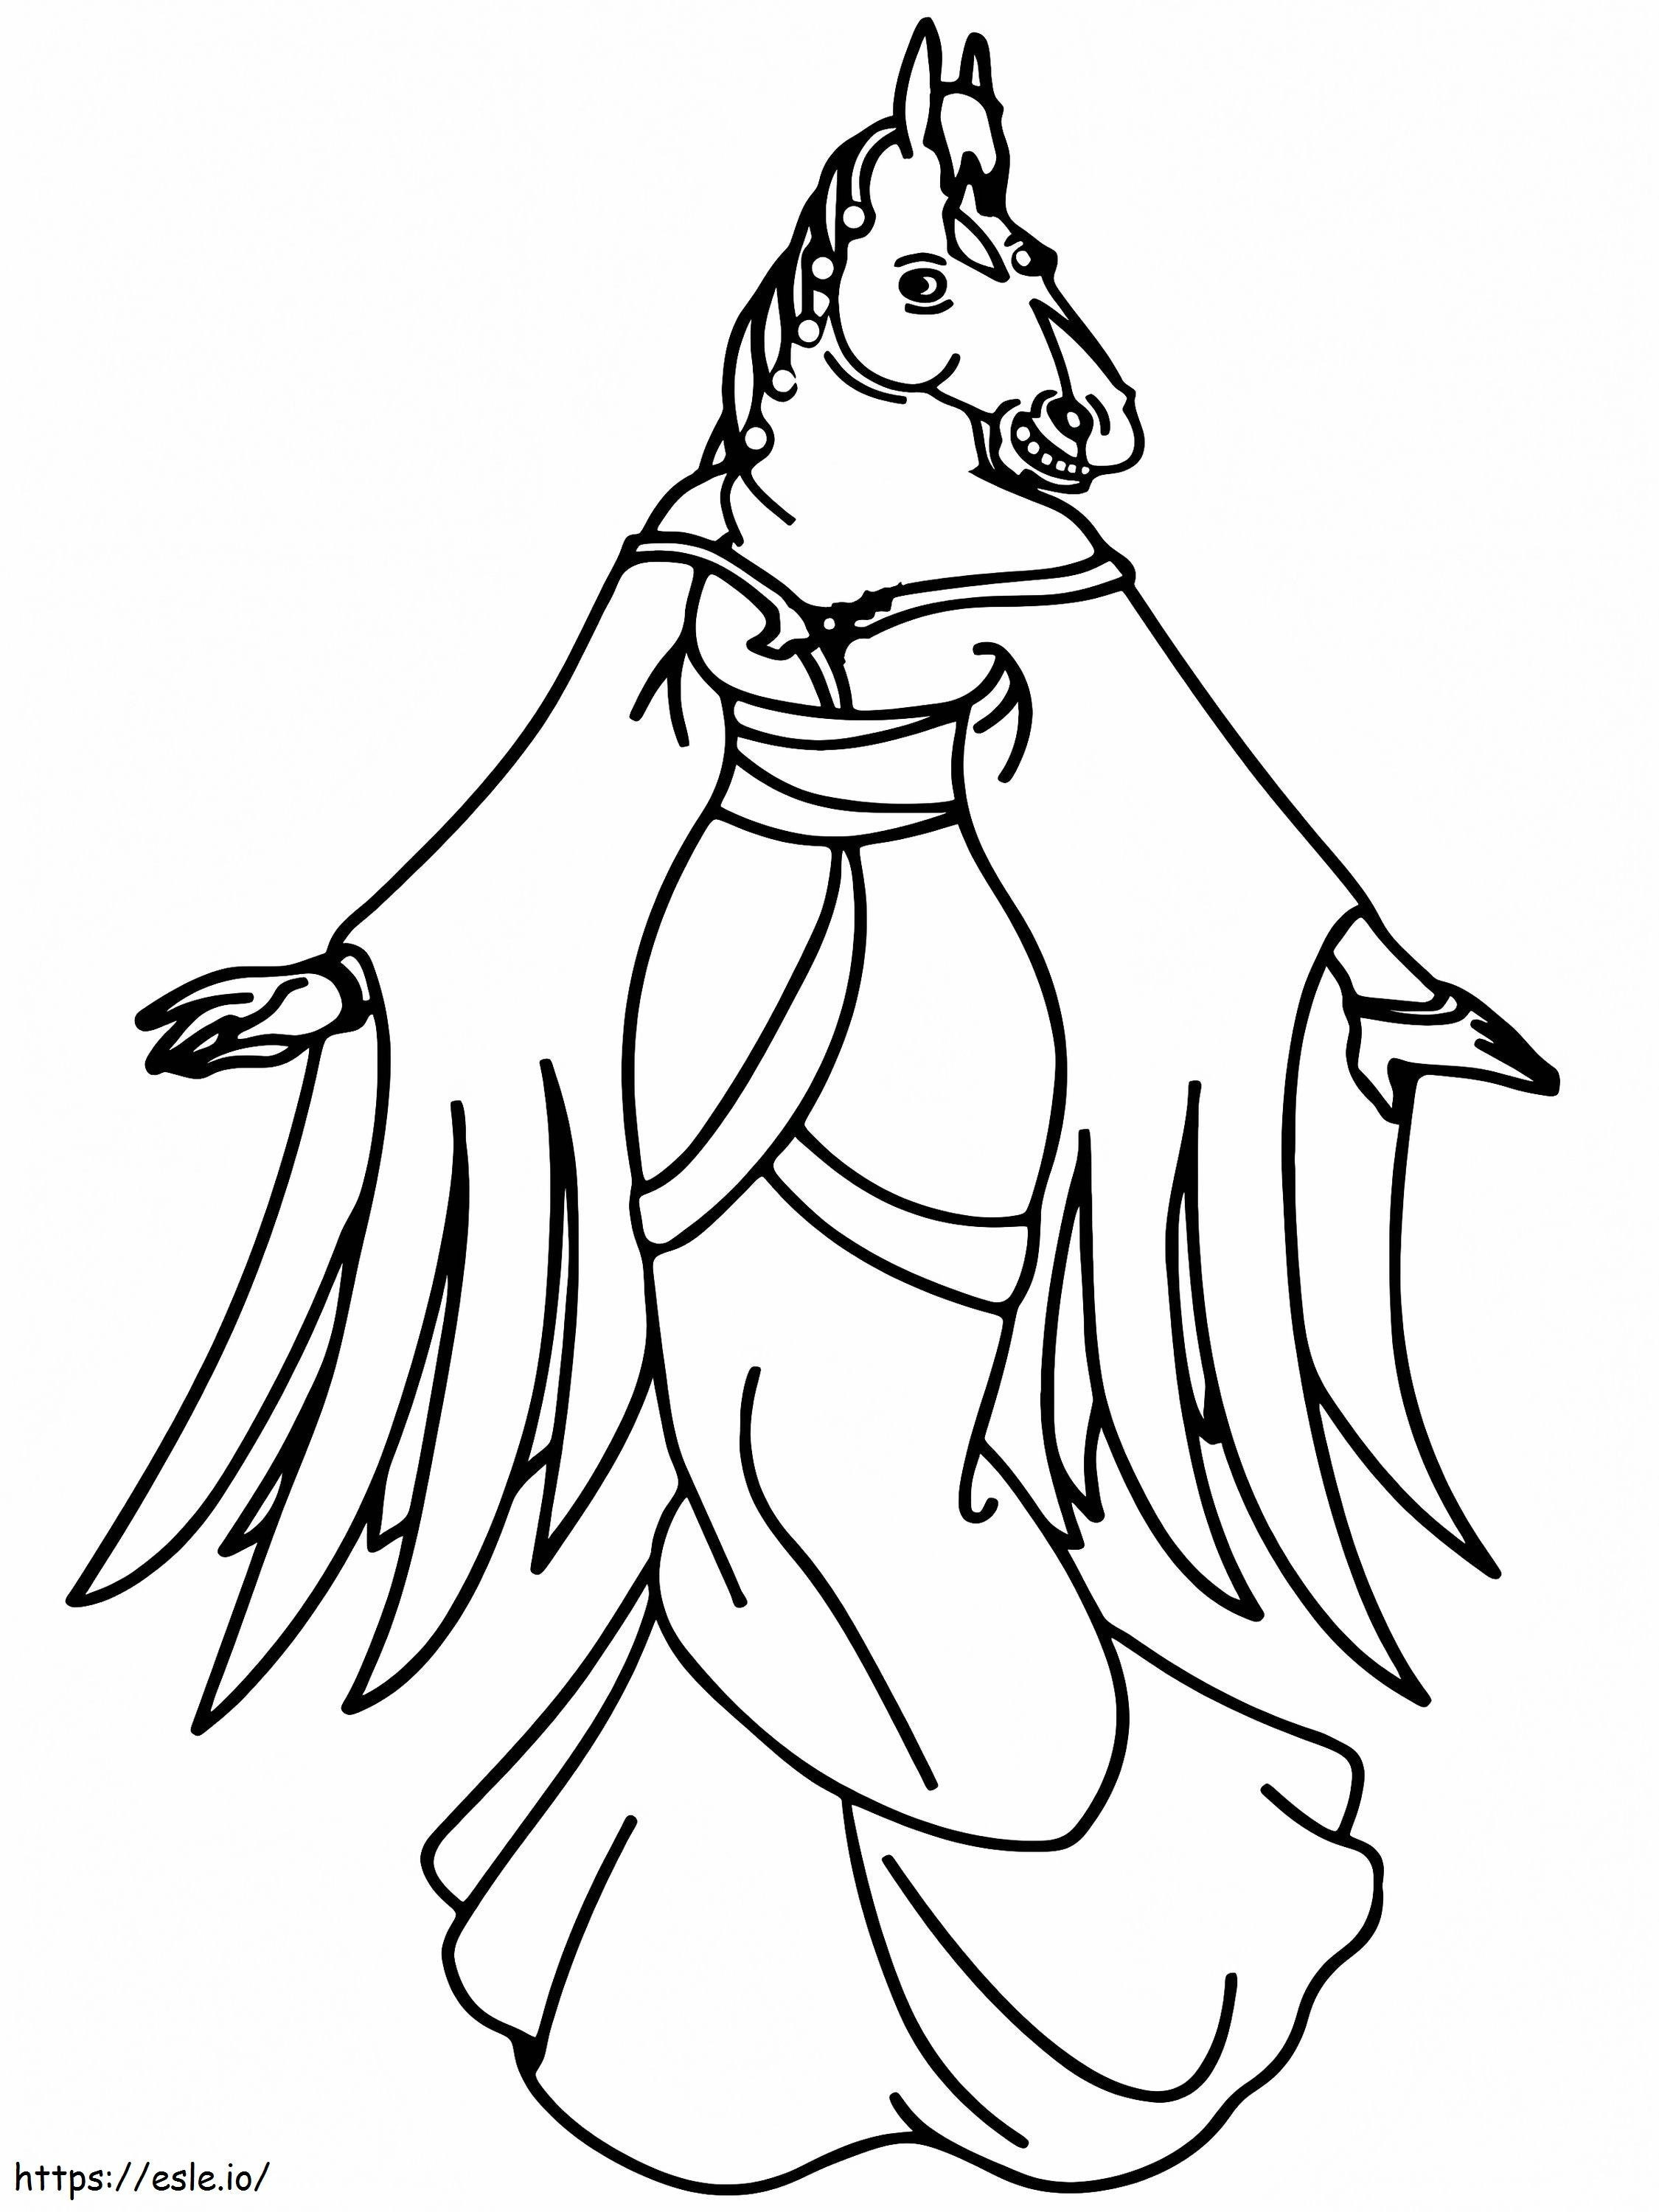 Cheerful Beatrice Horseman coloring page